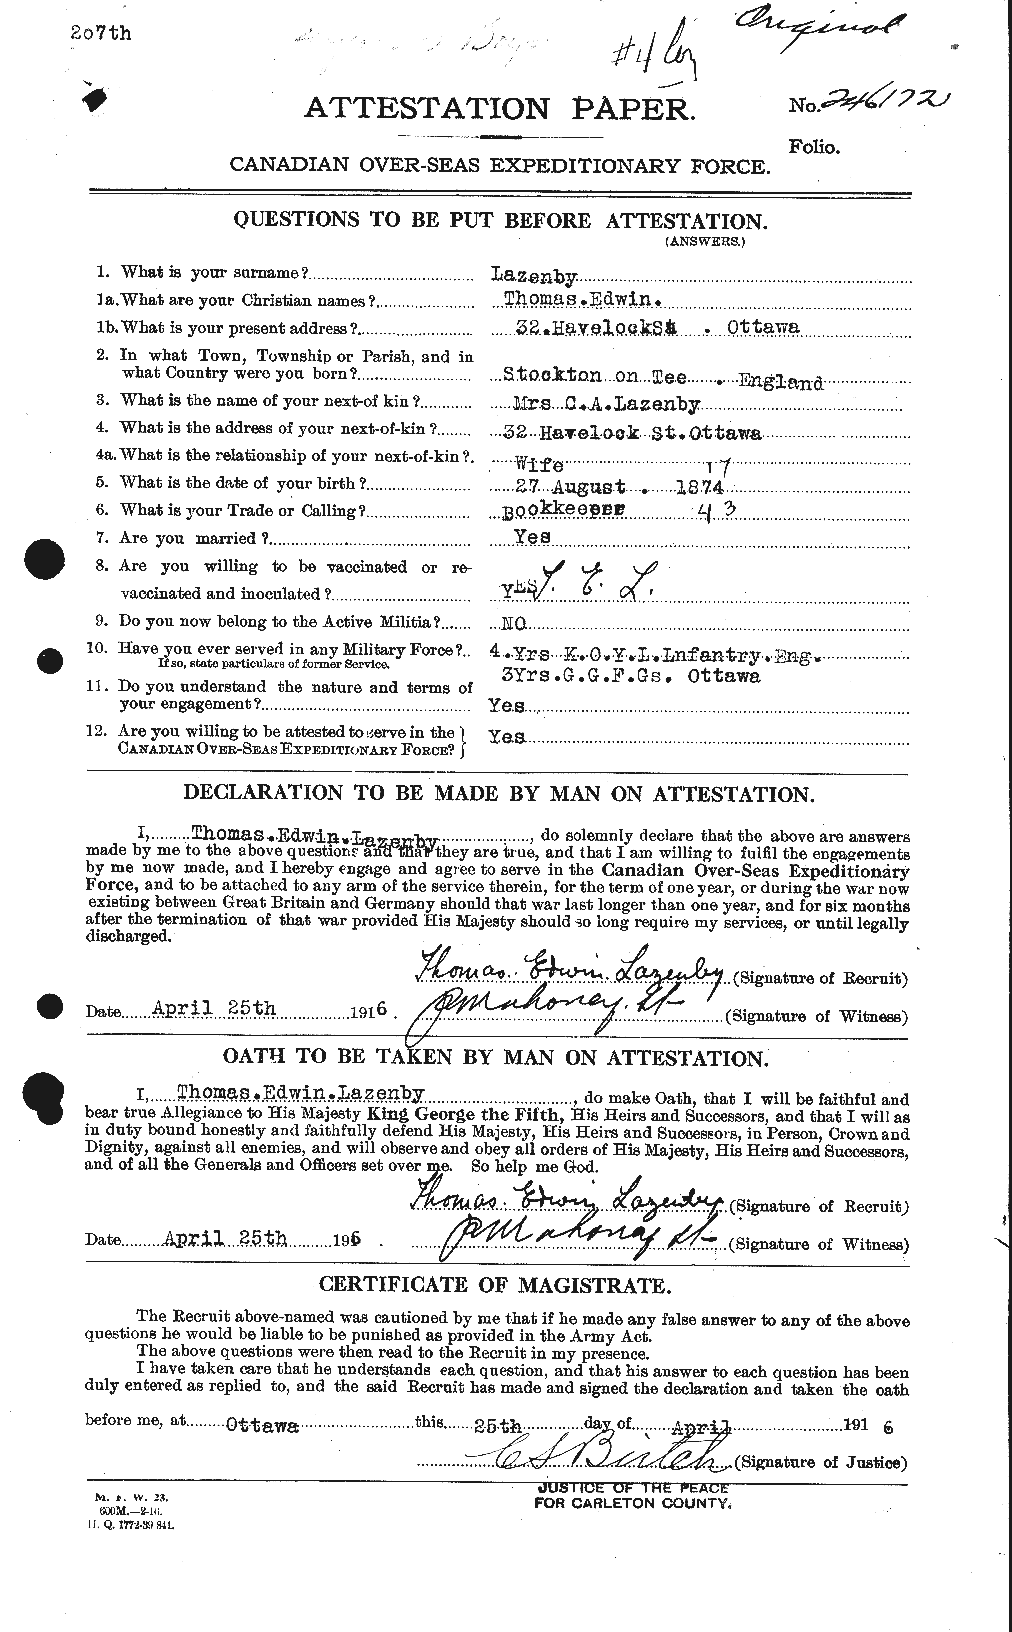 Personnel Records of the First World War - CEF 453215a